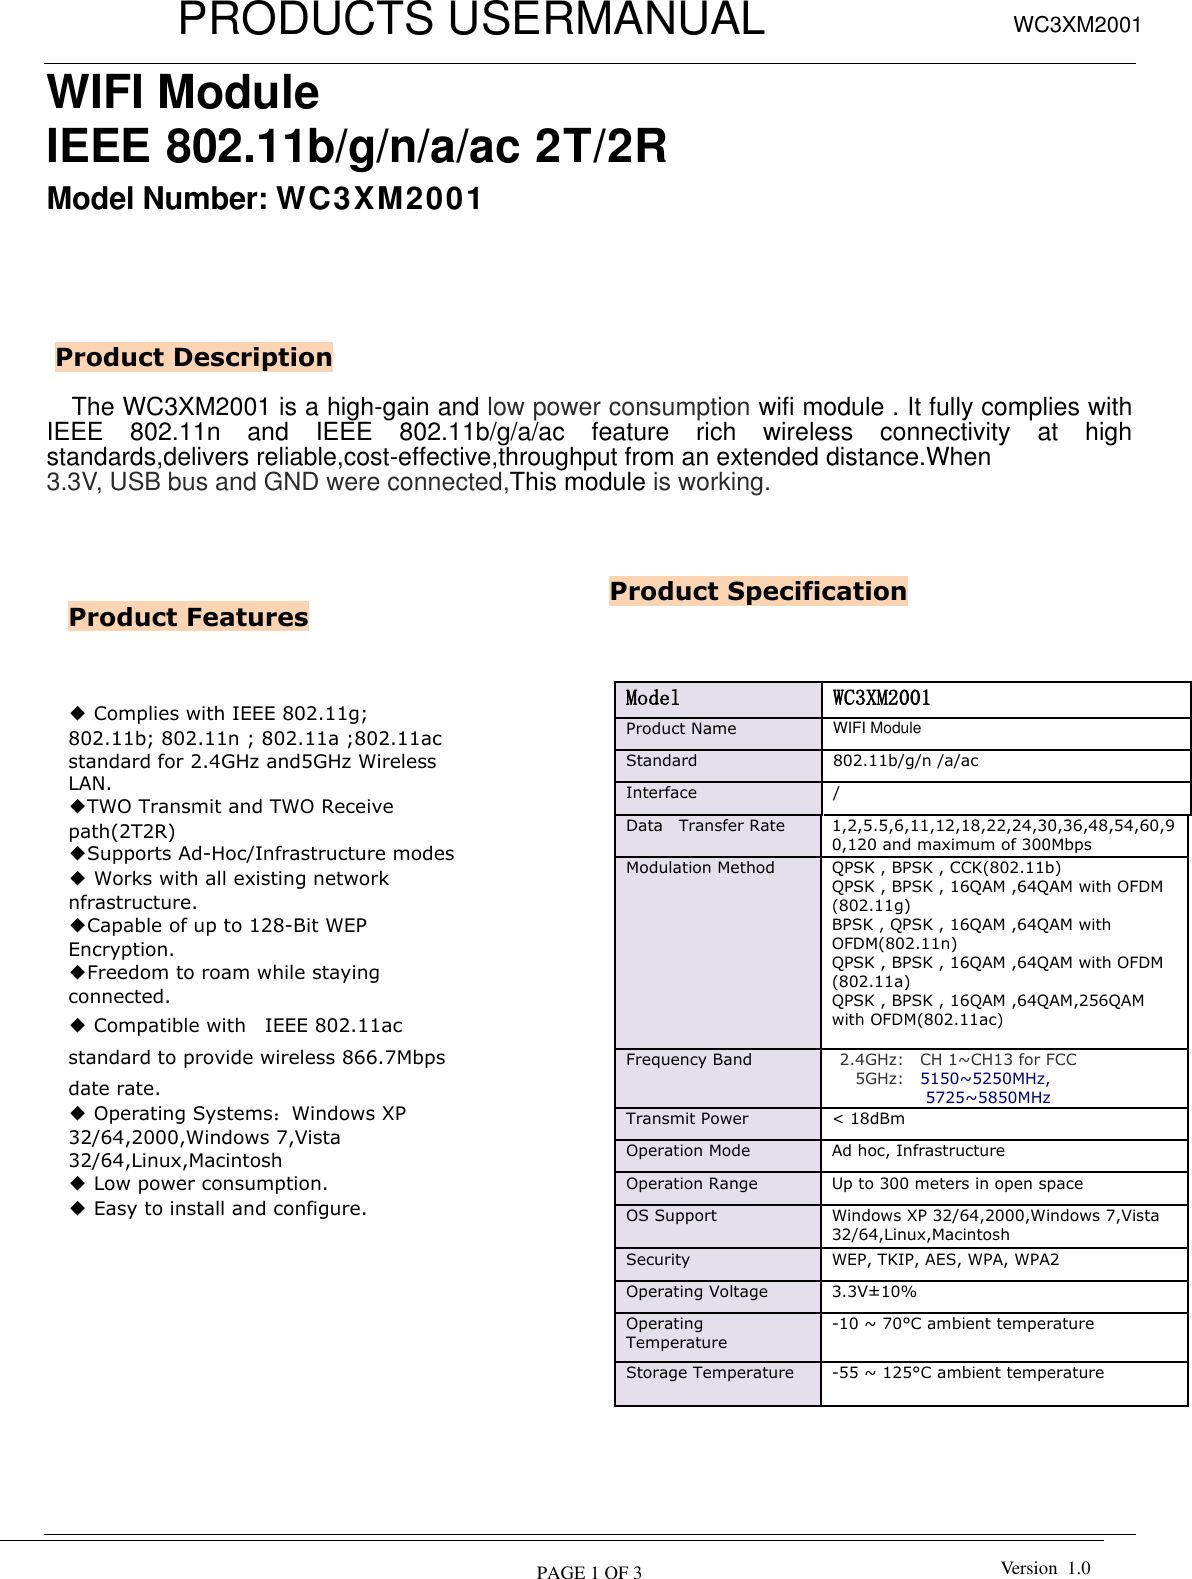           PRODUCTS USERMANUAL  PAGE 1 OF 3 WC3XM2001 Version  1.0  WIFI Module IEEE 802.11b/g/n/a/ac 2T/2R   Model Number: WC3XM2001        The WC3XM2001 is a high-gain and low power consumption wifi module . It fully complies with IEEE  802.11n  and  IEEE  802.11b/g/a/ac  feature  rich  wireless  connectivity  at  high standards,delivers reliable,cost-effective,throughput from an extended distance.When   3.3V, USB bus and GND were connected,This module is working.                                           Product Features Product Description ◆ Complies with IEEE 802.11g; 802.11b; 802.11n ; 802.11a ;802.11ac standard for 2.4GHz and5GHz Wireless LAN. ◆TWO Transmit and TWO Receive path(2T2R) ◆Supports Ad-Hoc/Infrastructure modes ◆ Works with all existing network nfrastructure. ◆Capable of up to 128-Bit WEP Encryption. ◆Freedom to roam while staying connected. ◆ Compatible with    IEEE 802.11ac standard to provide wireless 866.7Mbps date rate. ◆ Operating Systems：Windows XP 32/64,2000,Windows 7,Vista 32/64,Linux,Macintosh ◆ Low power consumption. ◆ Easy to install and configure.   Product Specification Model  WC3XM2001 Product Name   WIFI Module   Standard   802.11b/g/n /a/ac Interface / Data   Transfer Rate   1,2,5.5,6,11,12,18,22,24,30,36,48,54,60,90,120 and maximum of 300Mbps   Modulation Method   QPSK , BPSK , CCK(802.11b) QPSK , BPSK , 16QAM ,64QAM with OFDM (802.11g) BPSK , QPSK , 16QAM ,64QAM with OFDM(802.11n) QPSK , BPSK , 16QAM ,64QAM with OFDM (802.11a)   QPSK , BPSK , 16QAM ,64QAM,256QAM with OFDM(802.11ac)   Frequency Band     2.4GHz:    CH 1~CH13 for FCC       5GHz:    5150~5250MHz, 5725~5850MHz Transmit Power &lt; 18dBm   Operation Mode   Ad hoc, Infrastructure   Operation Range   Up to 300 meters in open space   OS Support   Windows XP 32/64,2000,Windows 7,Vista 32/64,Linux,Macintosh Security   WEP, TKIP, AES, WPA, WPA2   Operating Voltage 3.3V±10% Operating Temperature   -10 ~ 70°C ambient temperature   Storage Temperature   -55 ~ 125°C ambient temperature   Humidity   5 to 90 % maximum (non-condensing)     